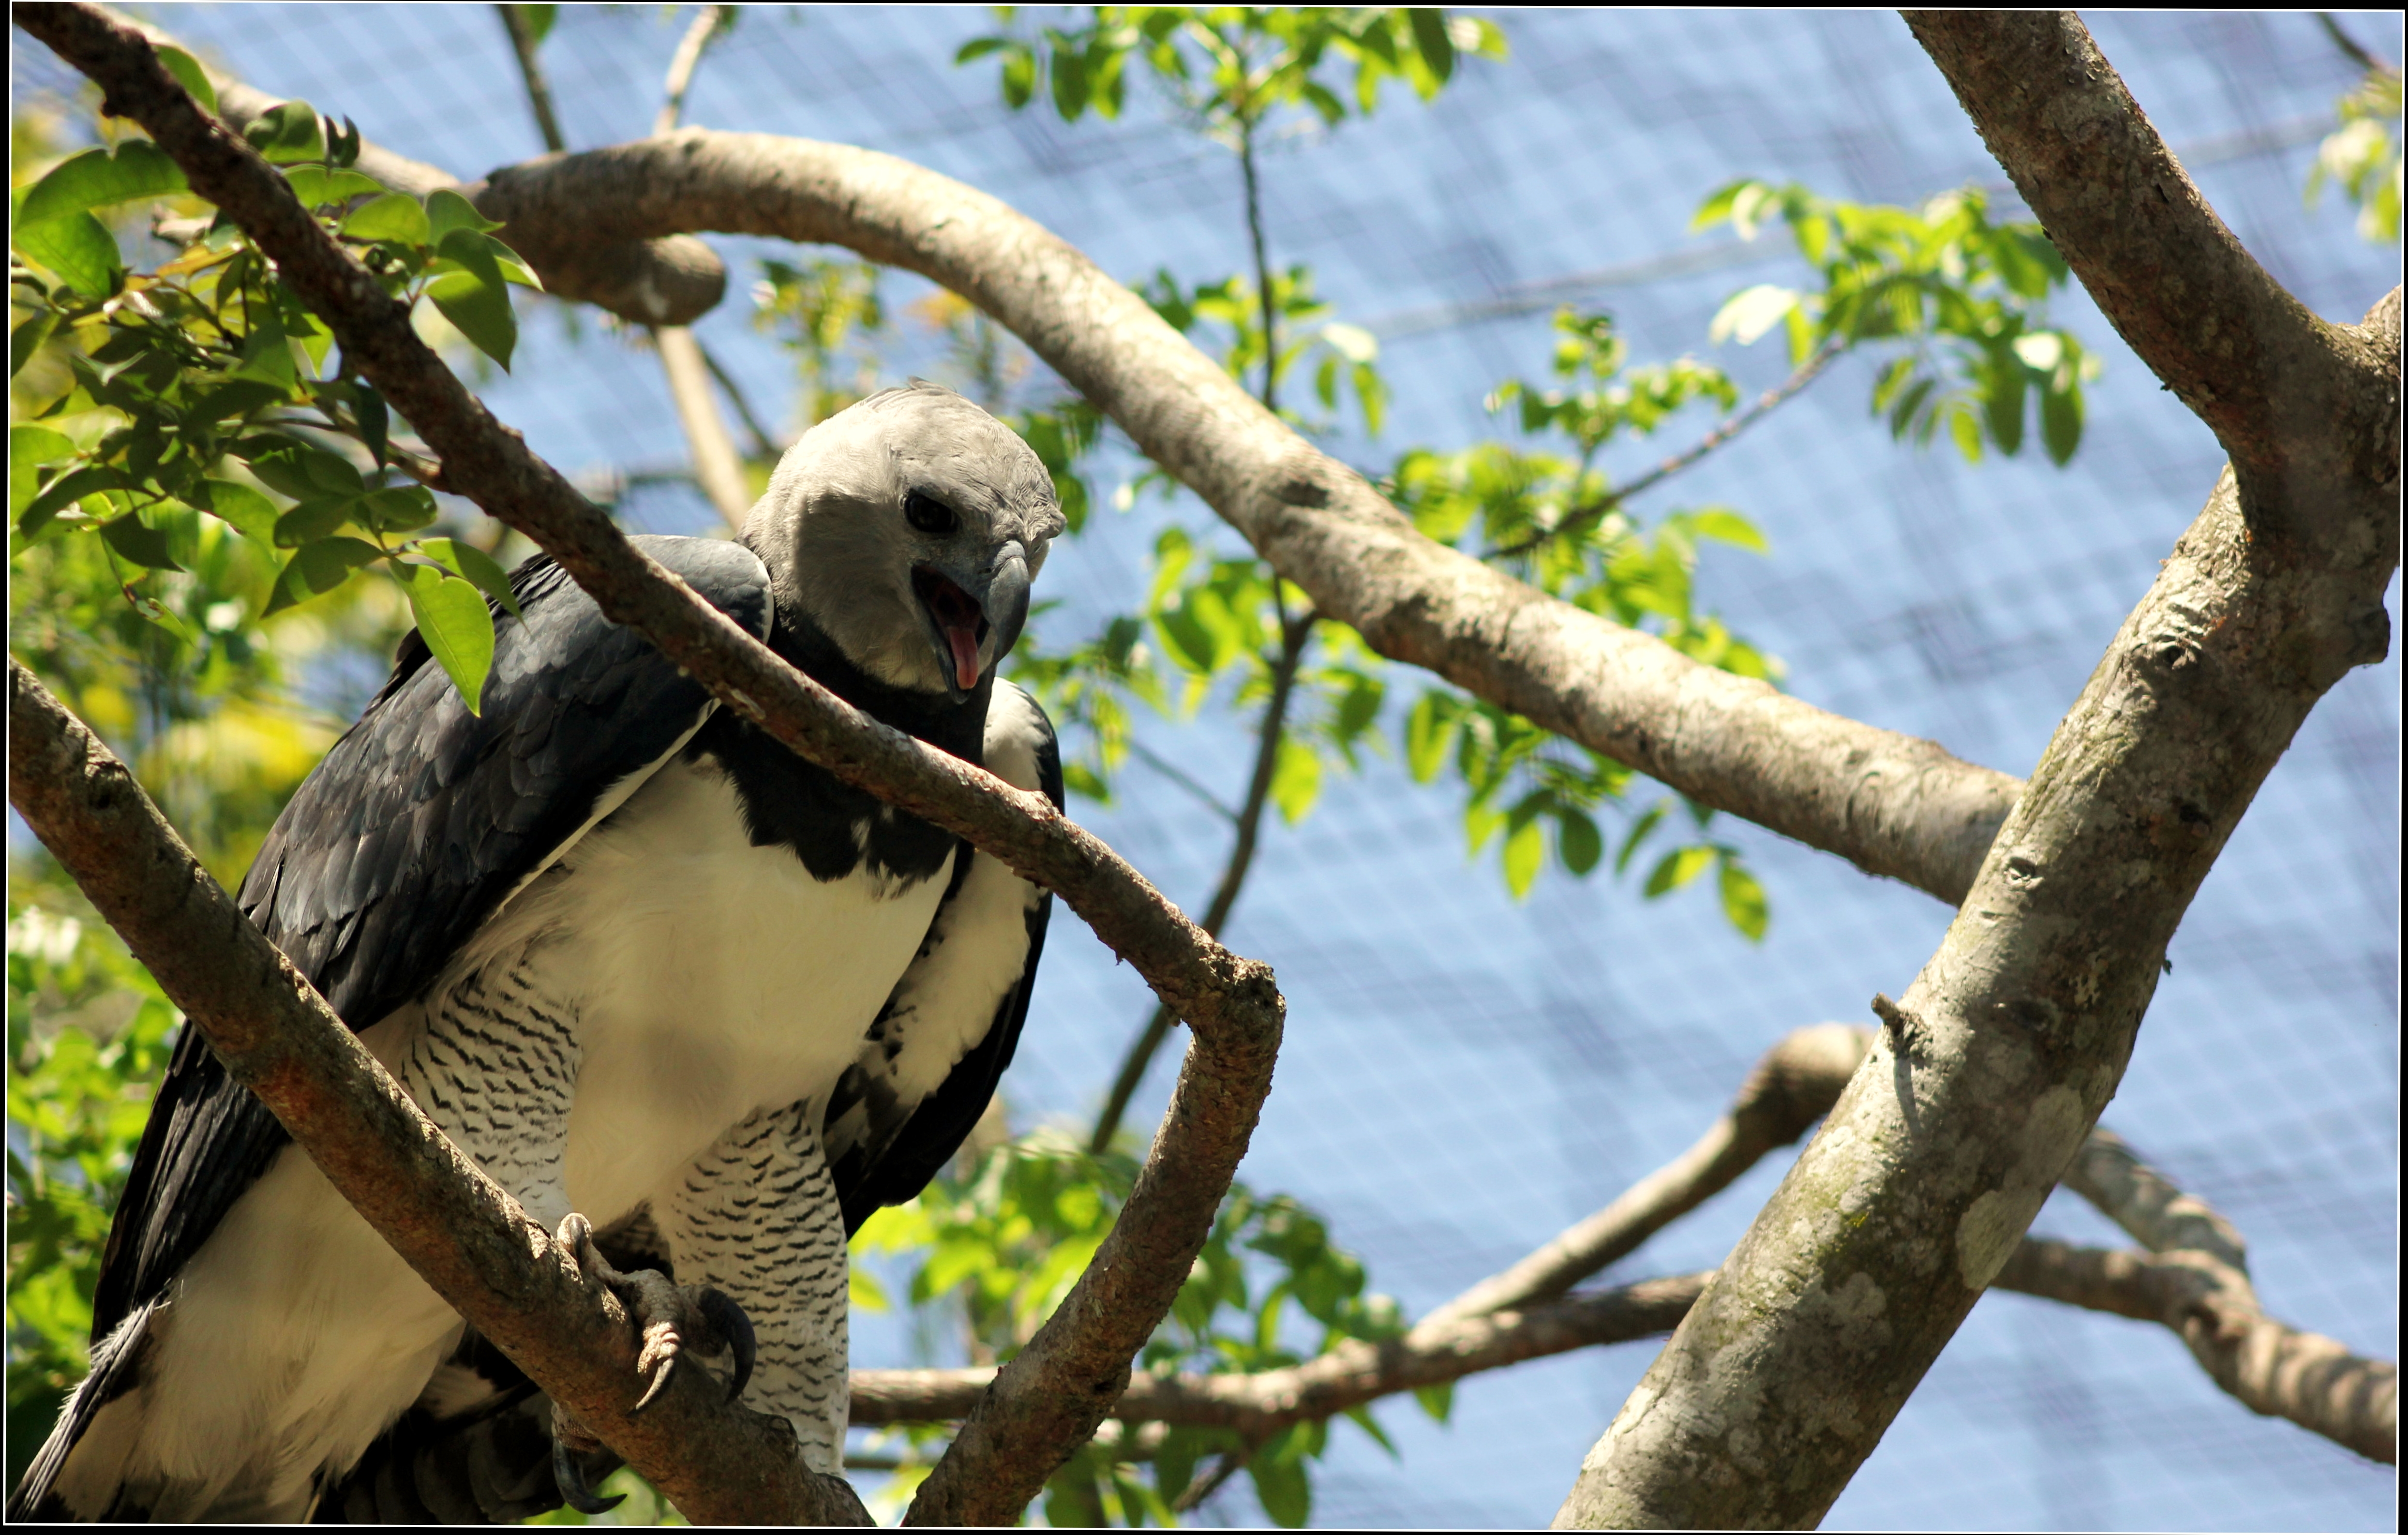 Harpy Eagle in tree. Photo taken by cuatrok77, published on Flickr